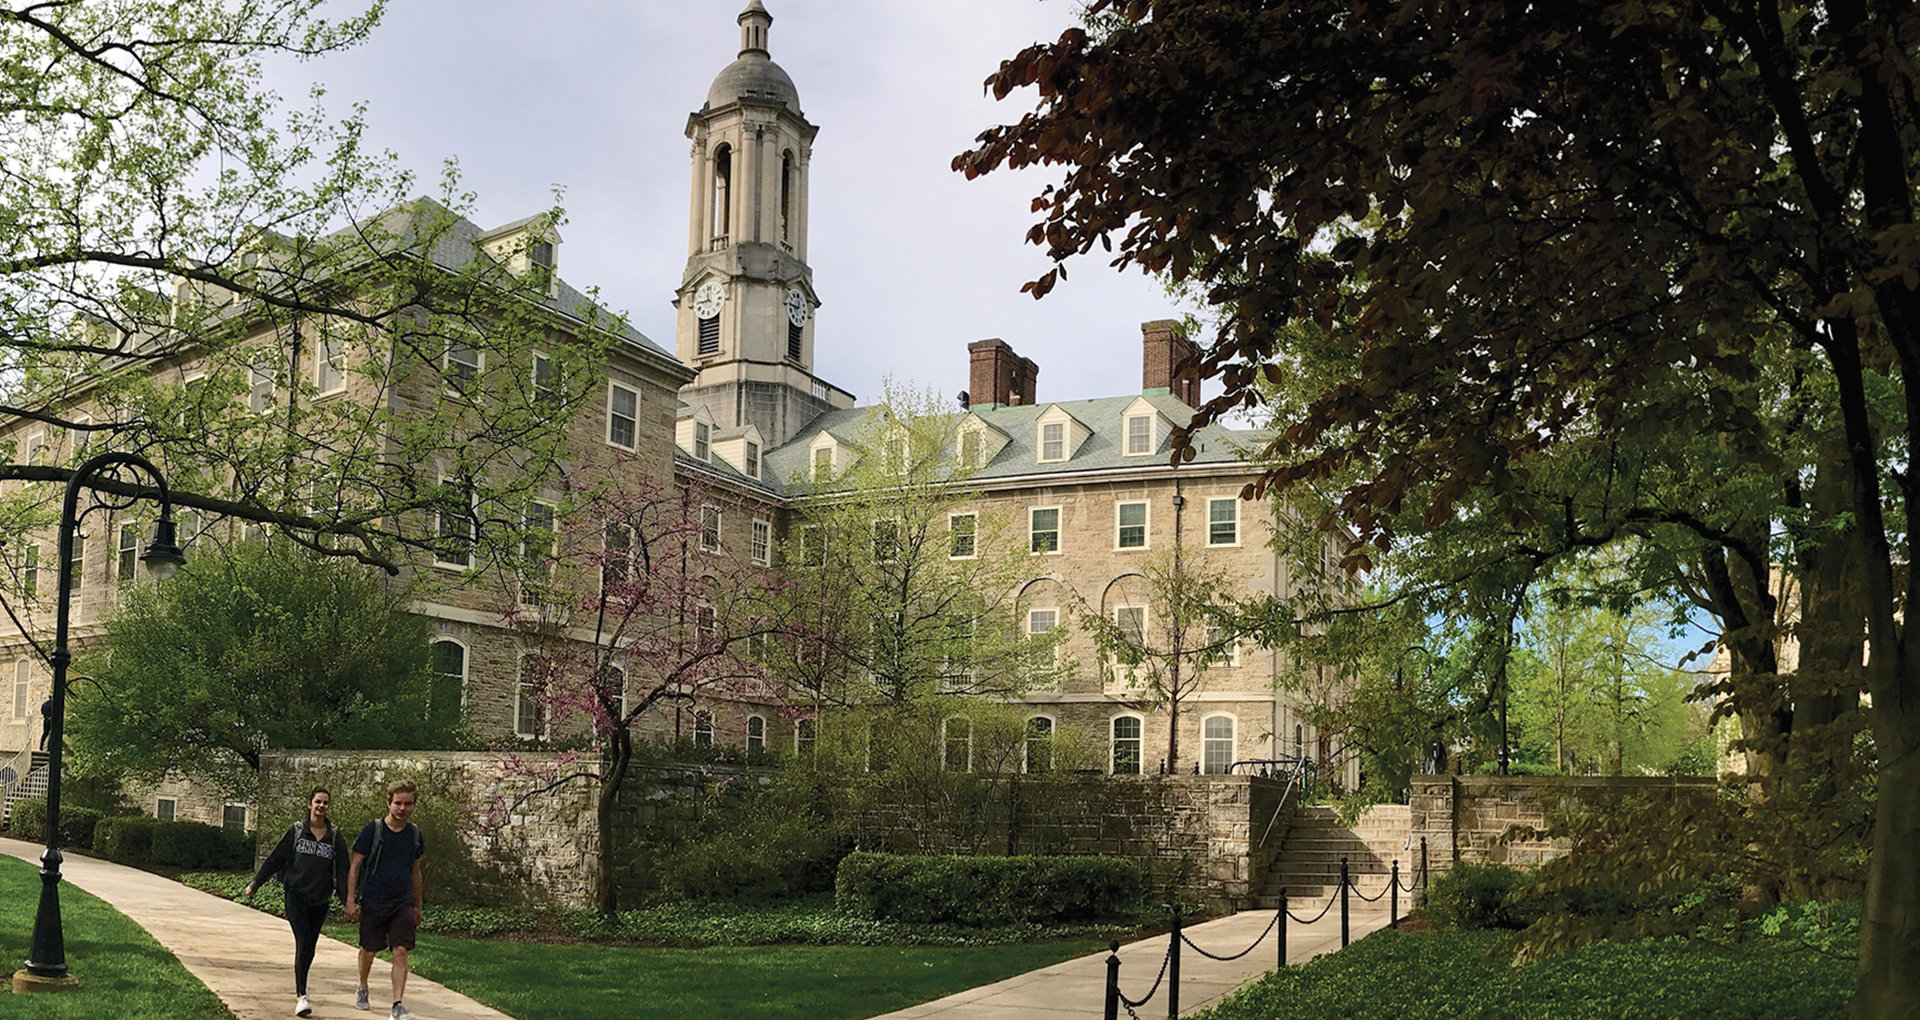 An image of the Old Main building at Penn State